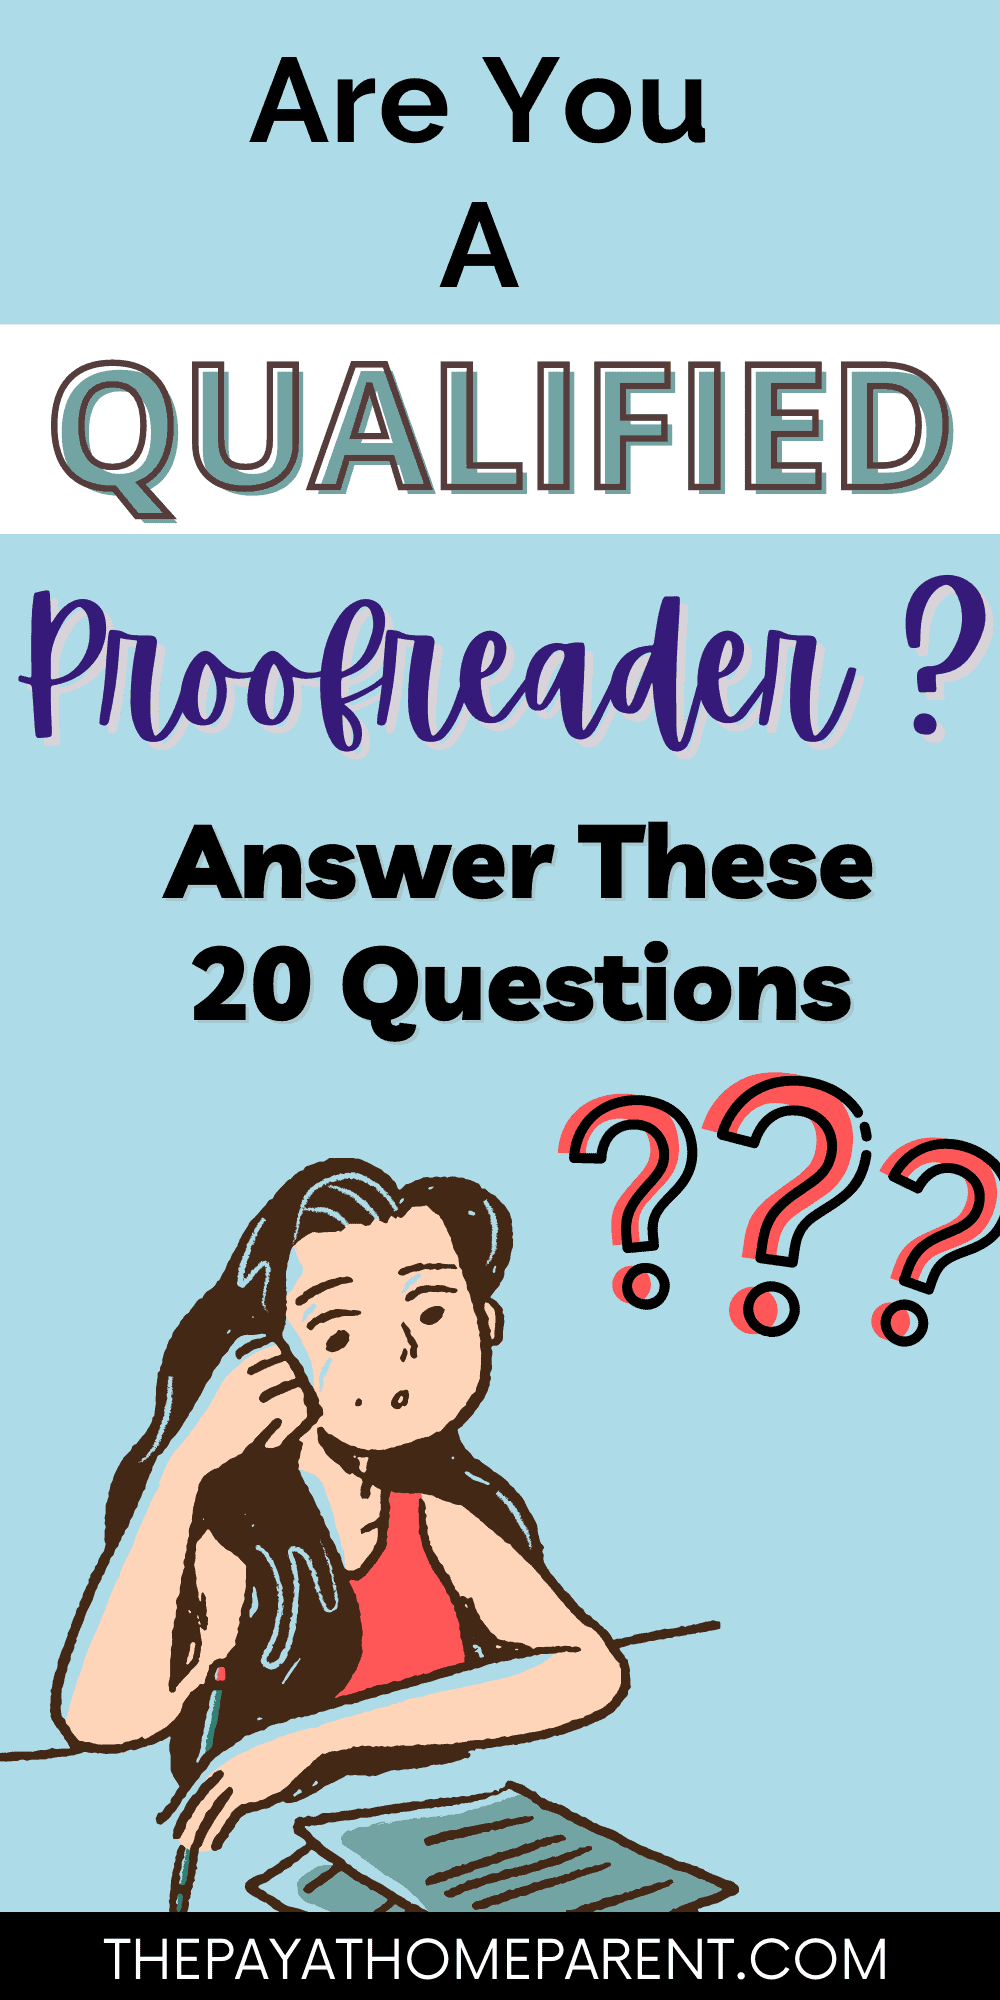 proofreading services quiz answers